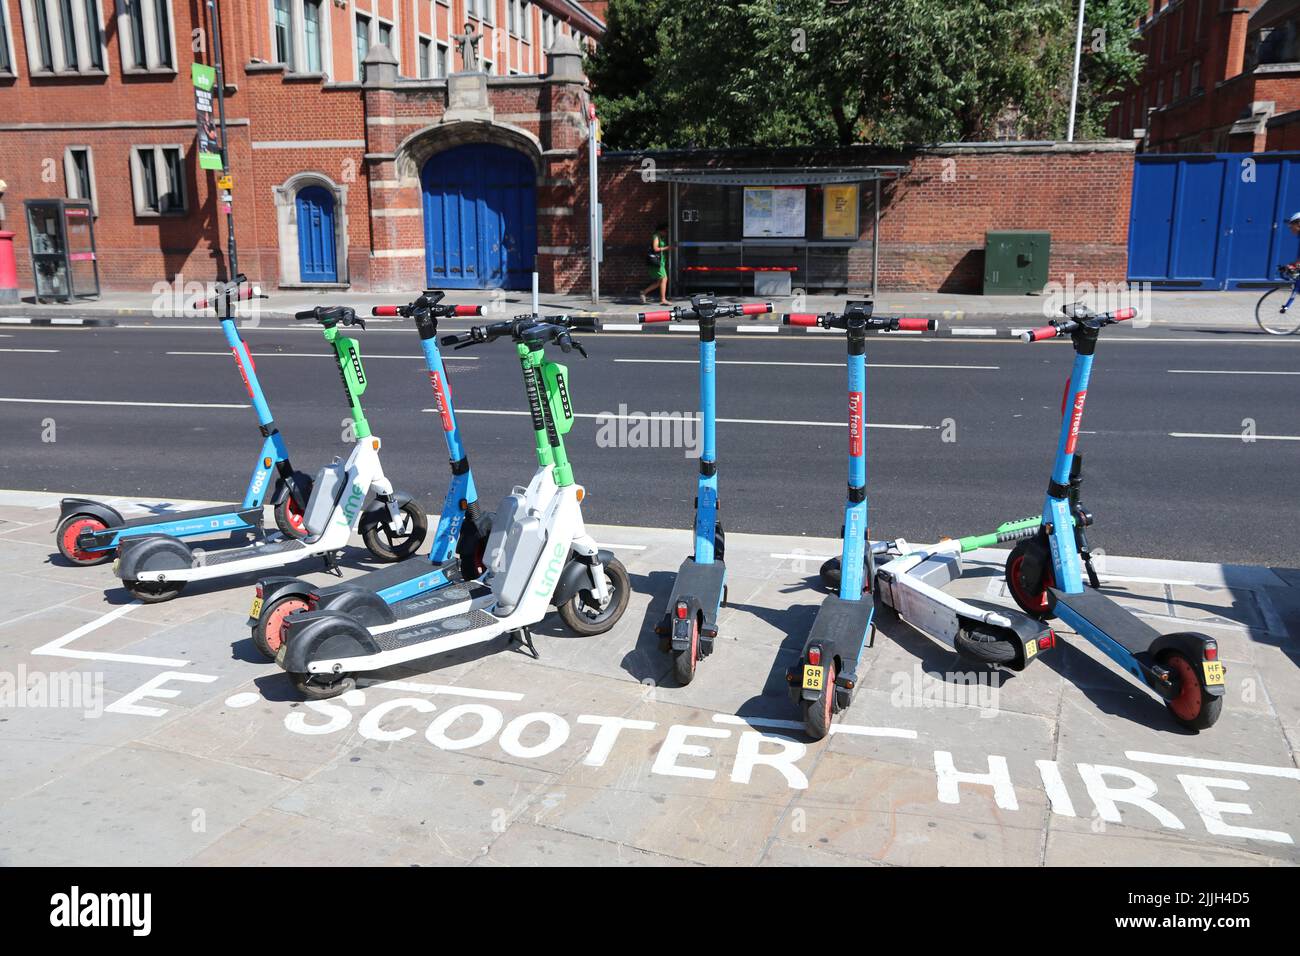 ELECTRIC SCOOTERS IN AN E-SCOOTER HIRE PARKING BAY ON A LONDON STREET Stock Photo